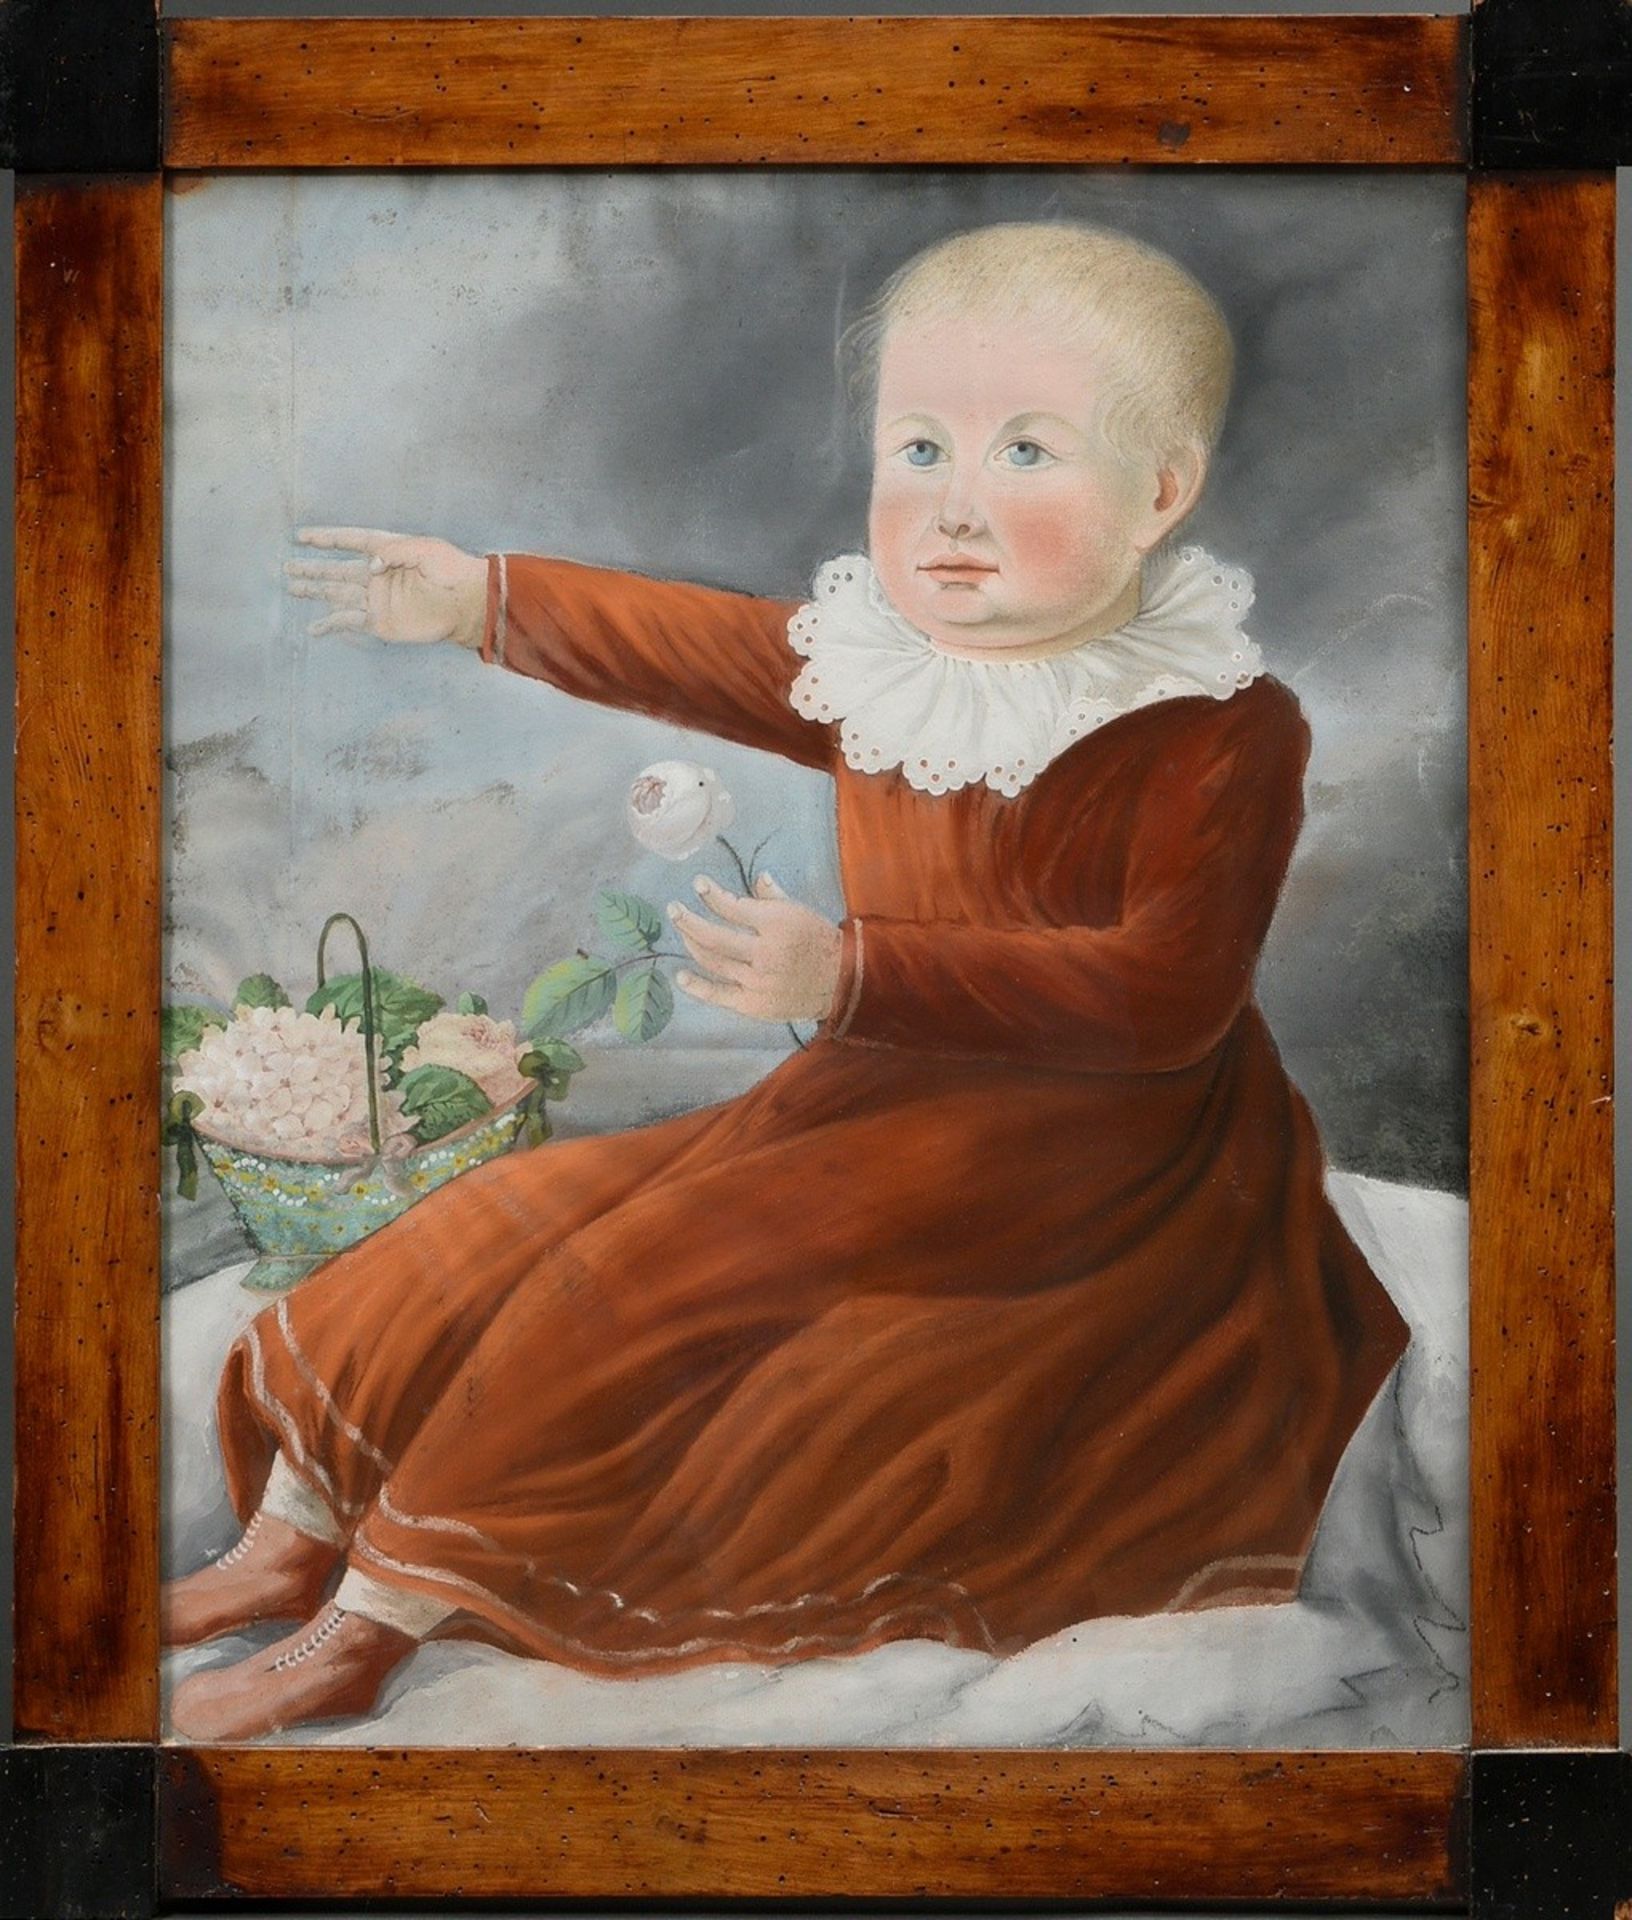 Runge, Philipp Otto (1777-1810) Succession "Infant with a Rose", c. 1805/1810, mixed media, in cont